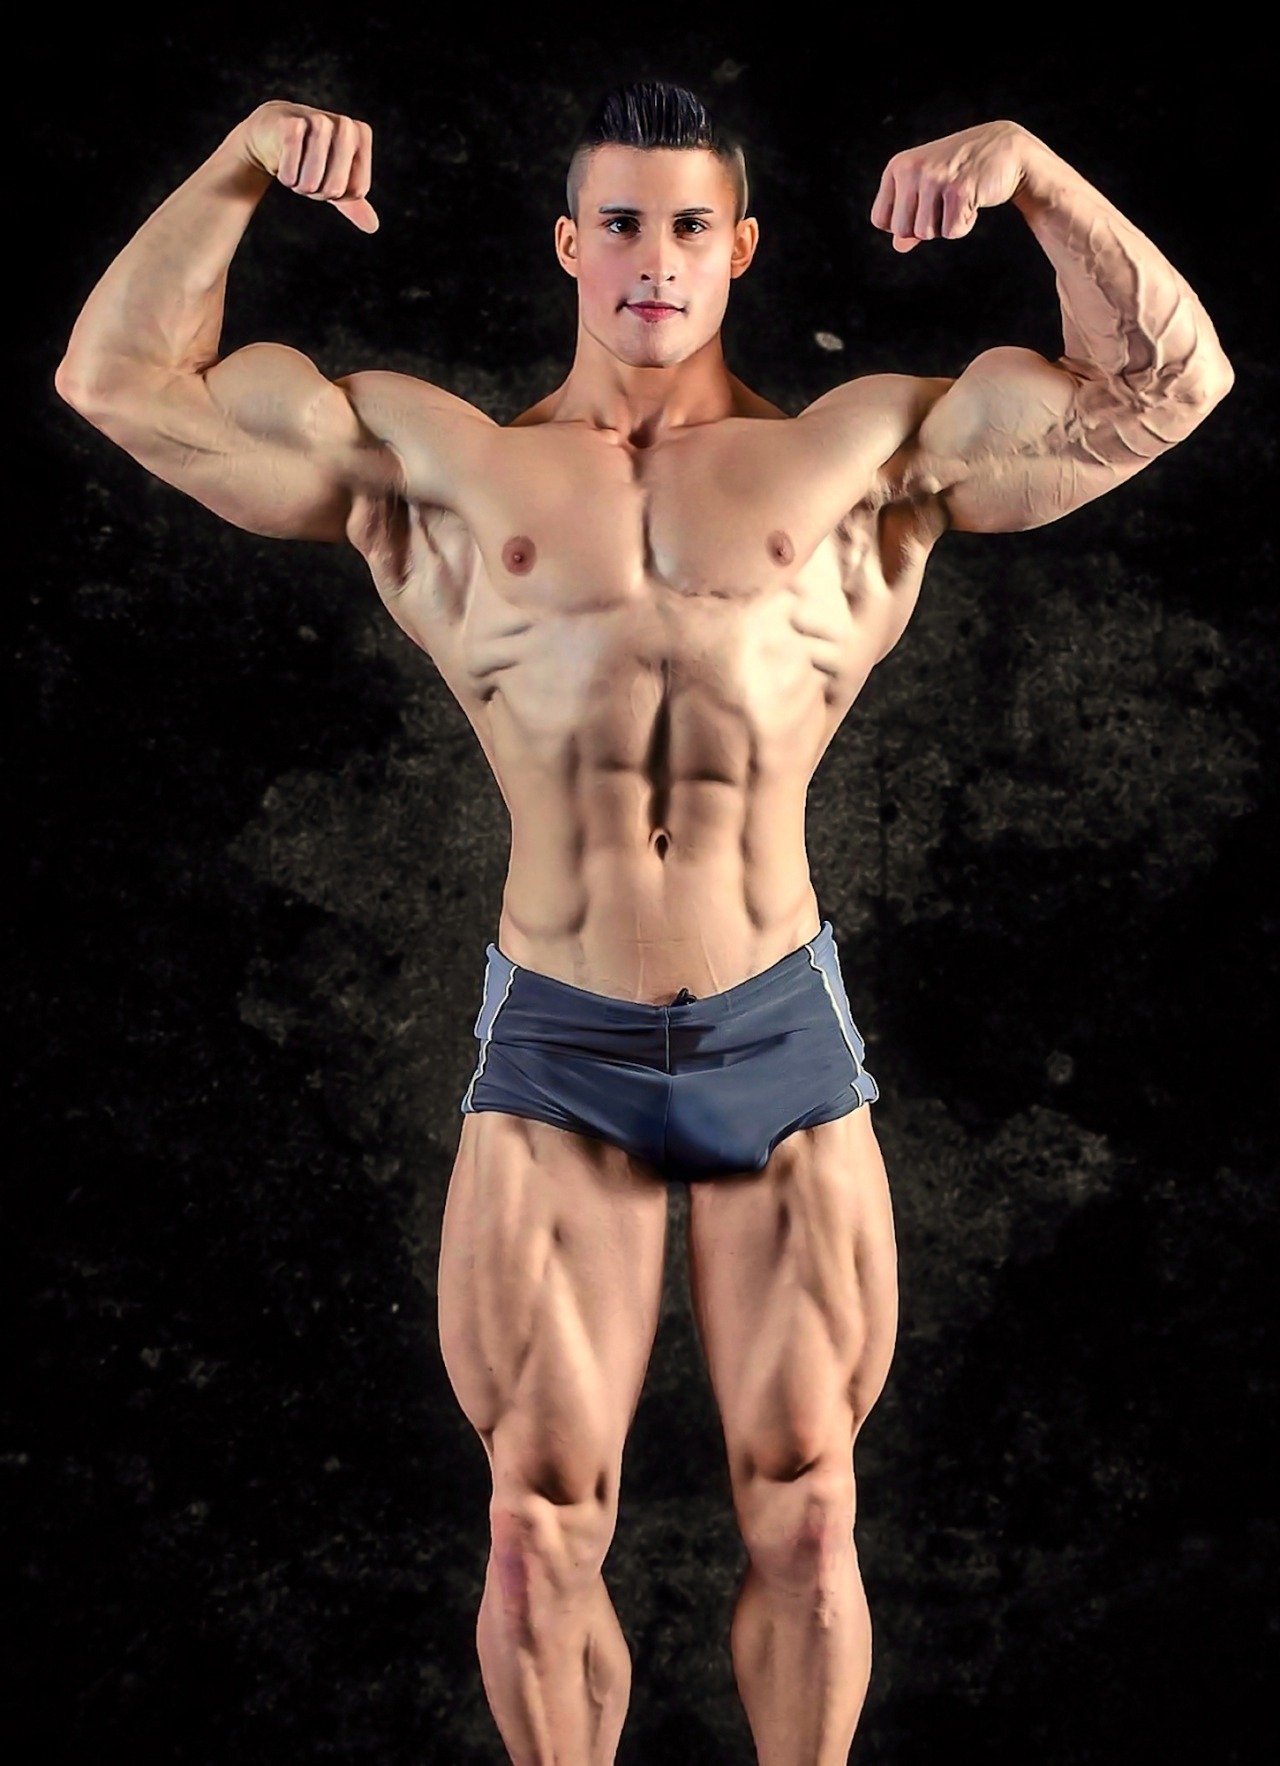 beautifulyoungmuscle:Post #1000: Andras Fister: beautiful young muscle